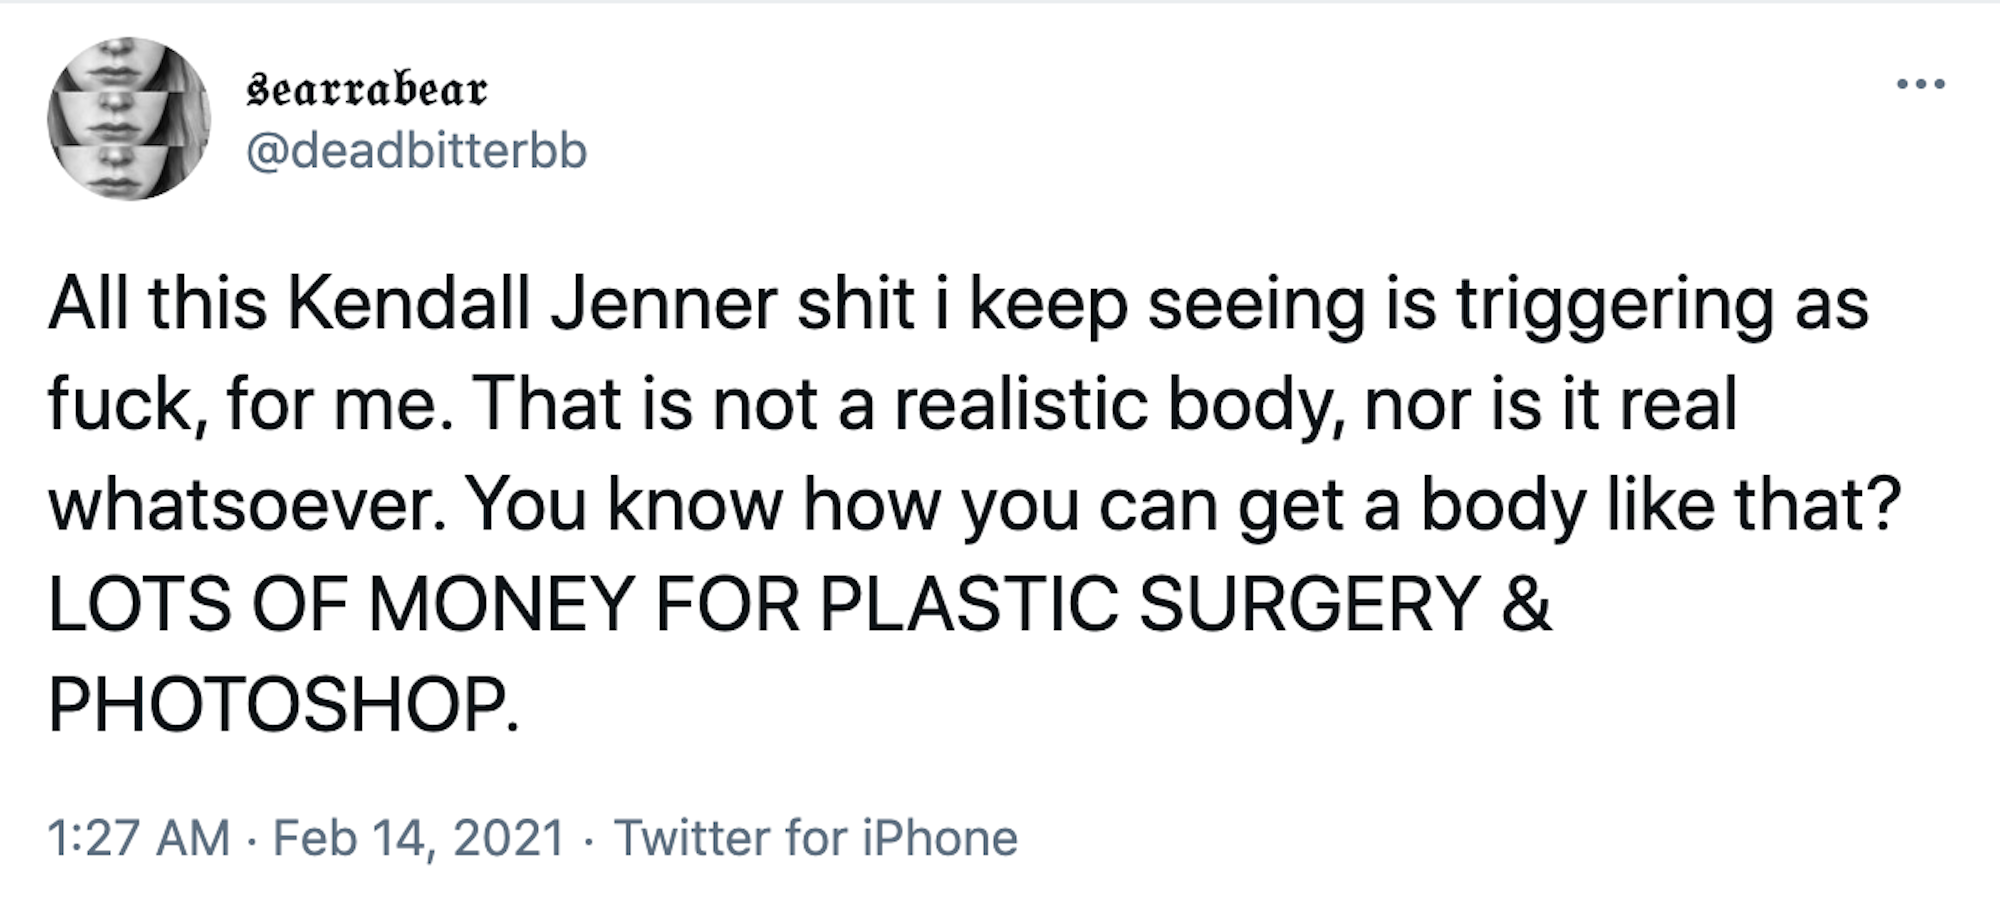 All this Kendall Jenner shit i keep seeing is triggering as fuck, for me. That is not a realistic body, nor is it real whatsoever. You know how you can get a body like that? LOTS OF MONEY FOR PLASTIC SURGERY & PHOTOSHOP.